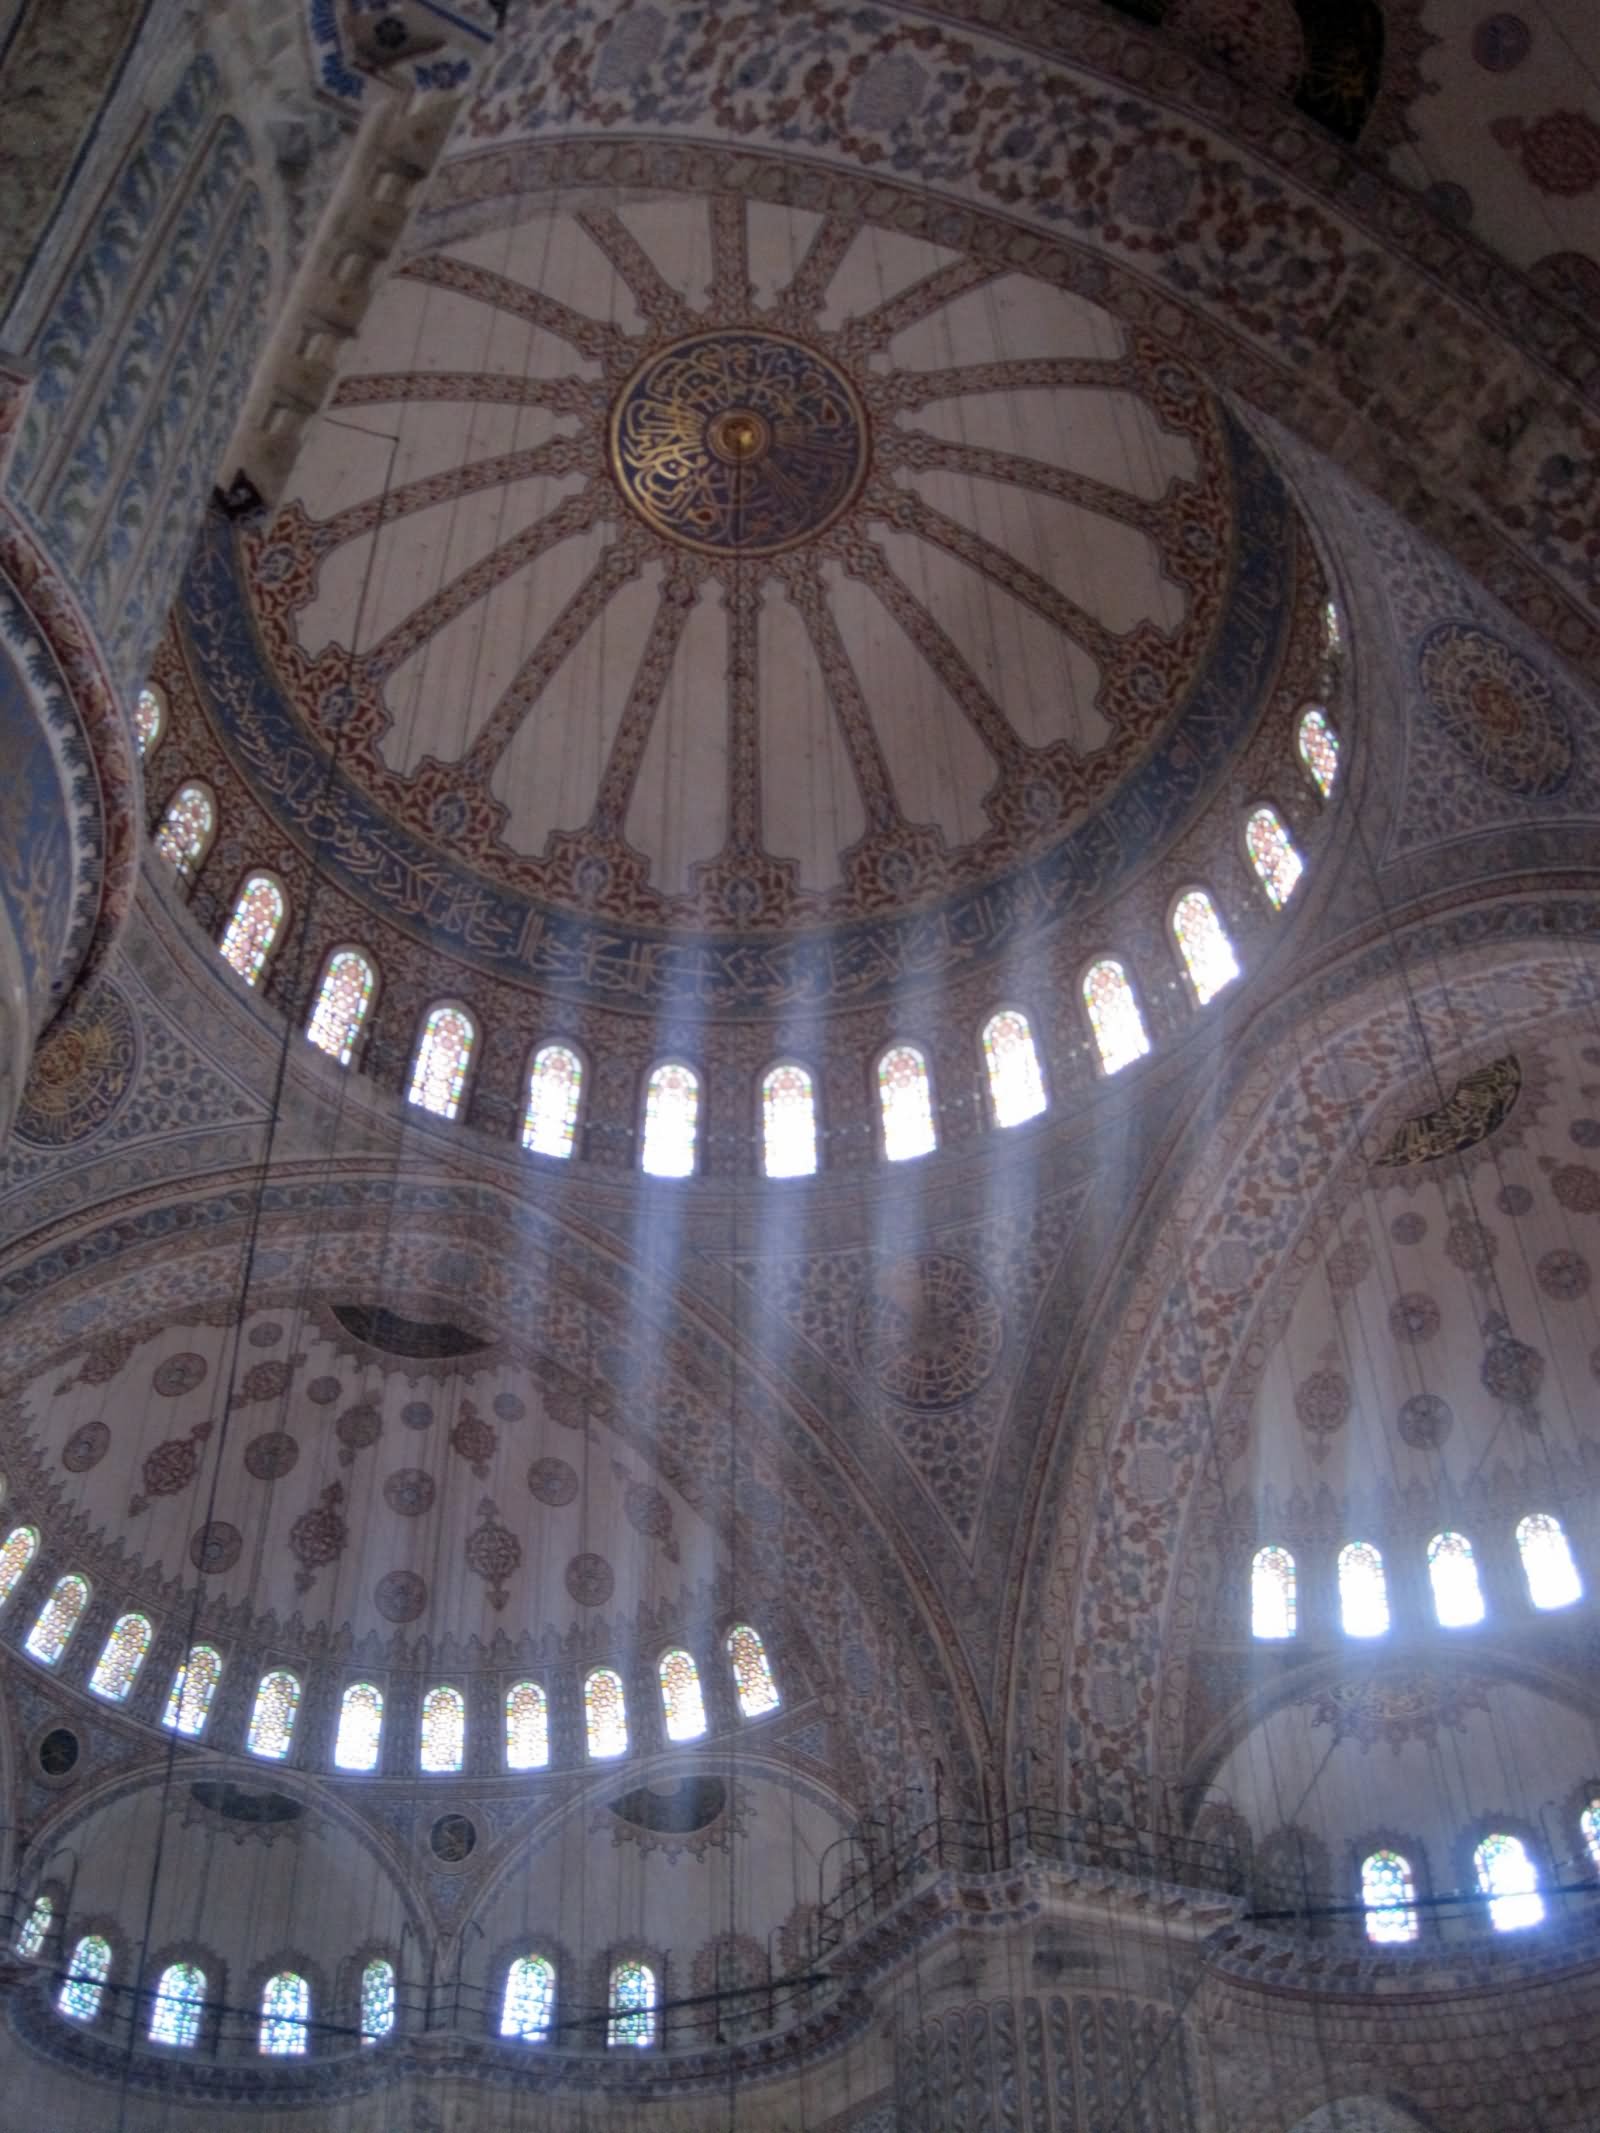 Incredible Architecture Domes Inside The Blue Mosque, Istanbul